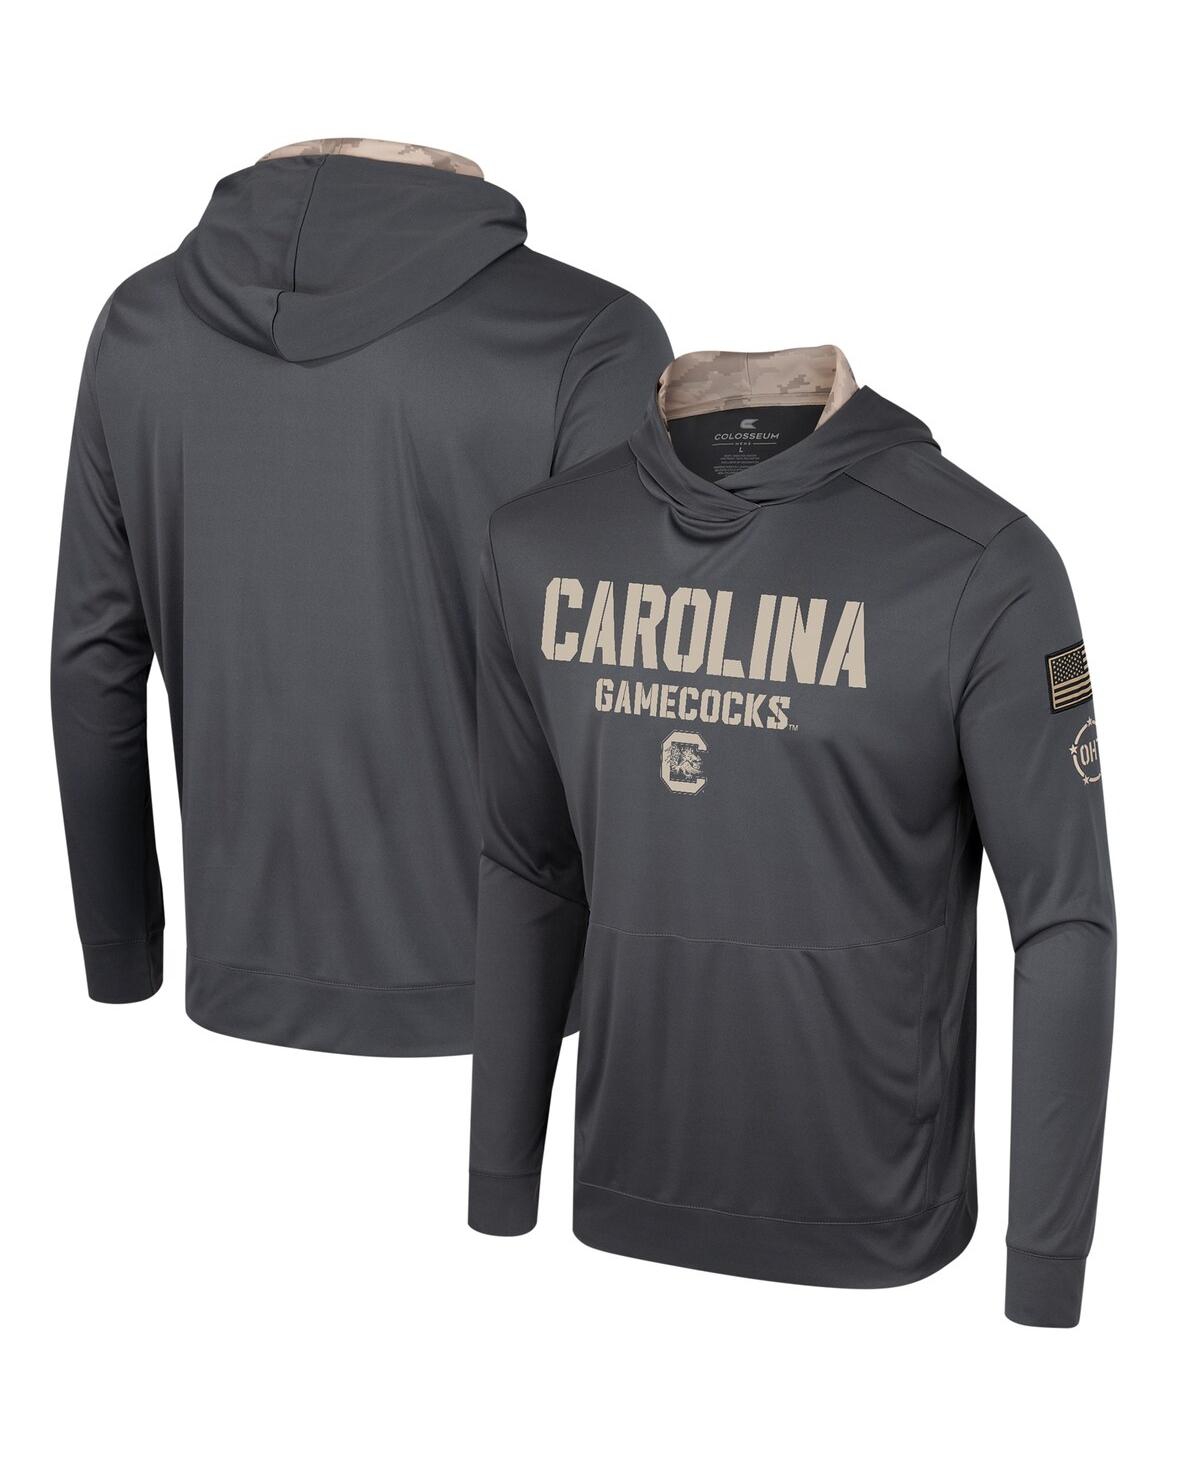 Men's Colosseum Charcoal South Carolina Gamecocks Oht Military-Inspired Appreciation Long Sleeve Hoodie T-shirt - Charcoal